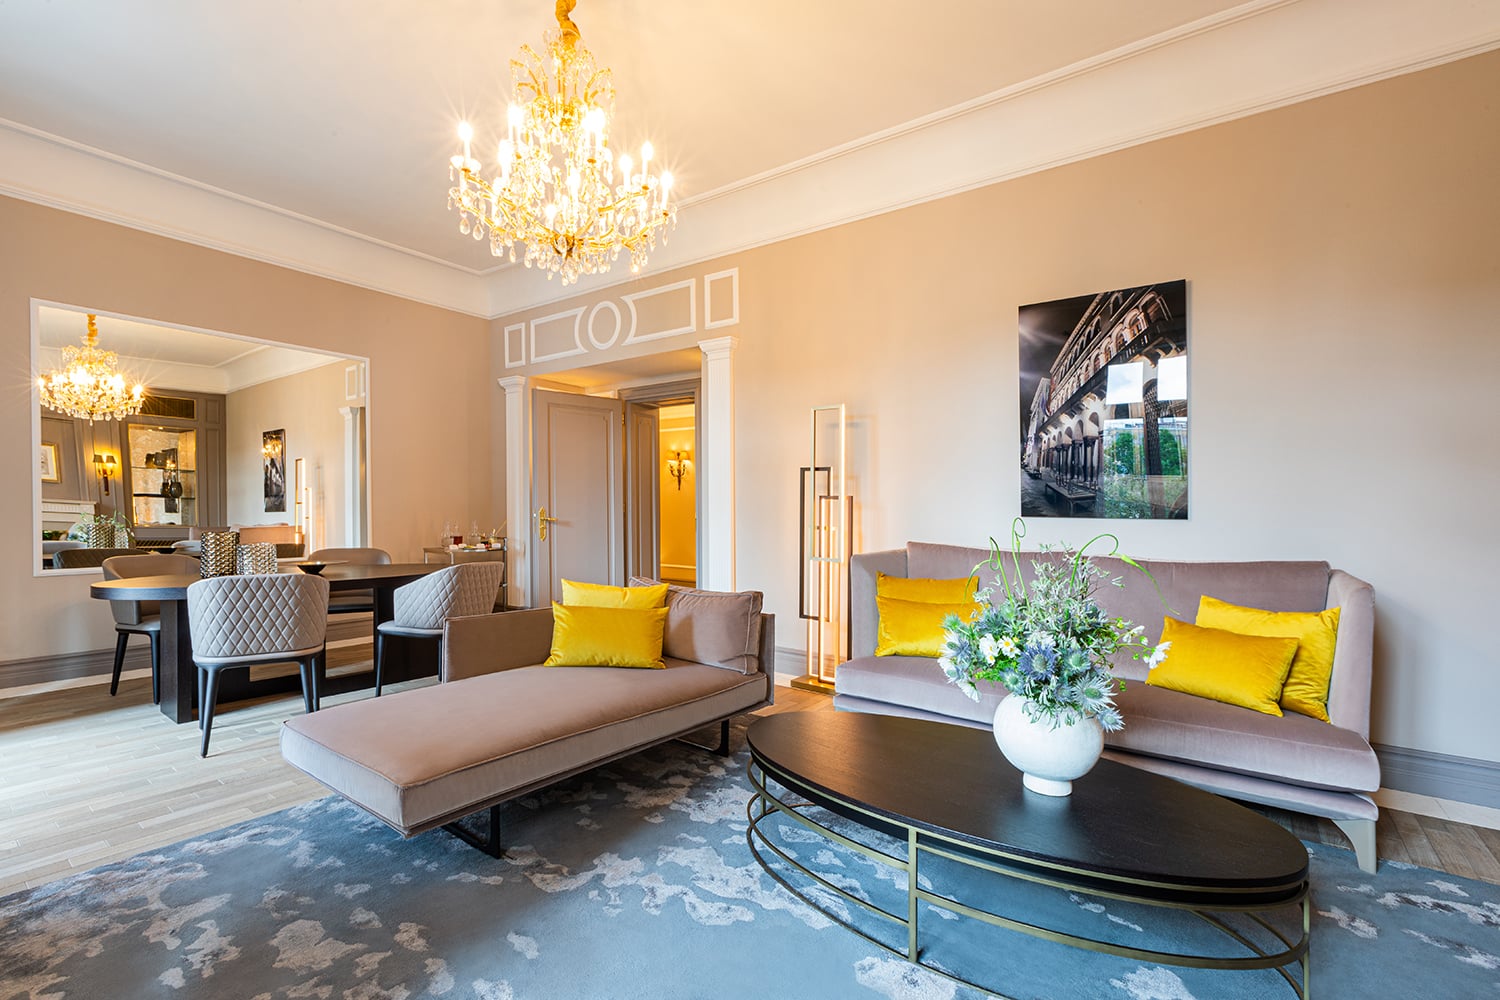 Excelsior Suite at 5 star luxury hotel Cologne